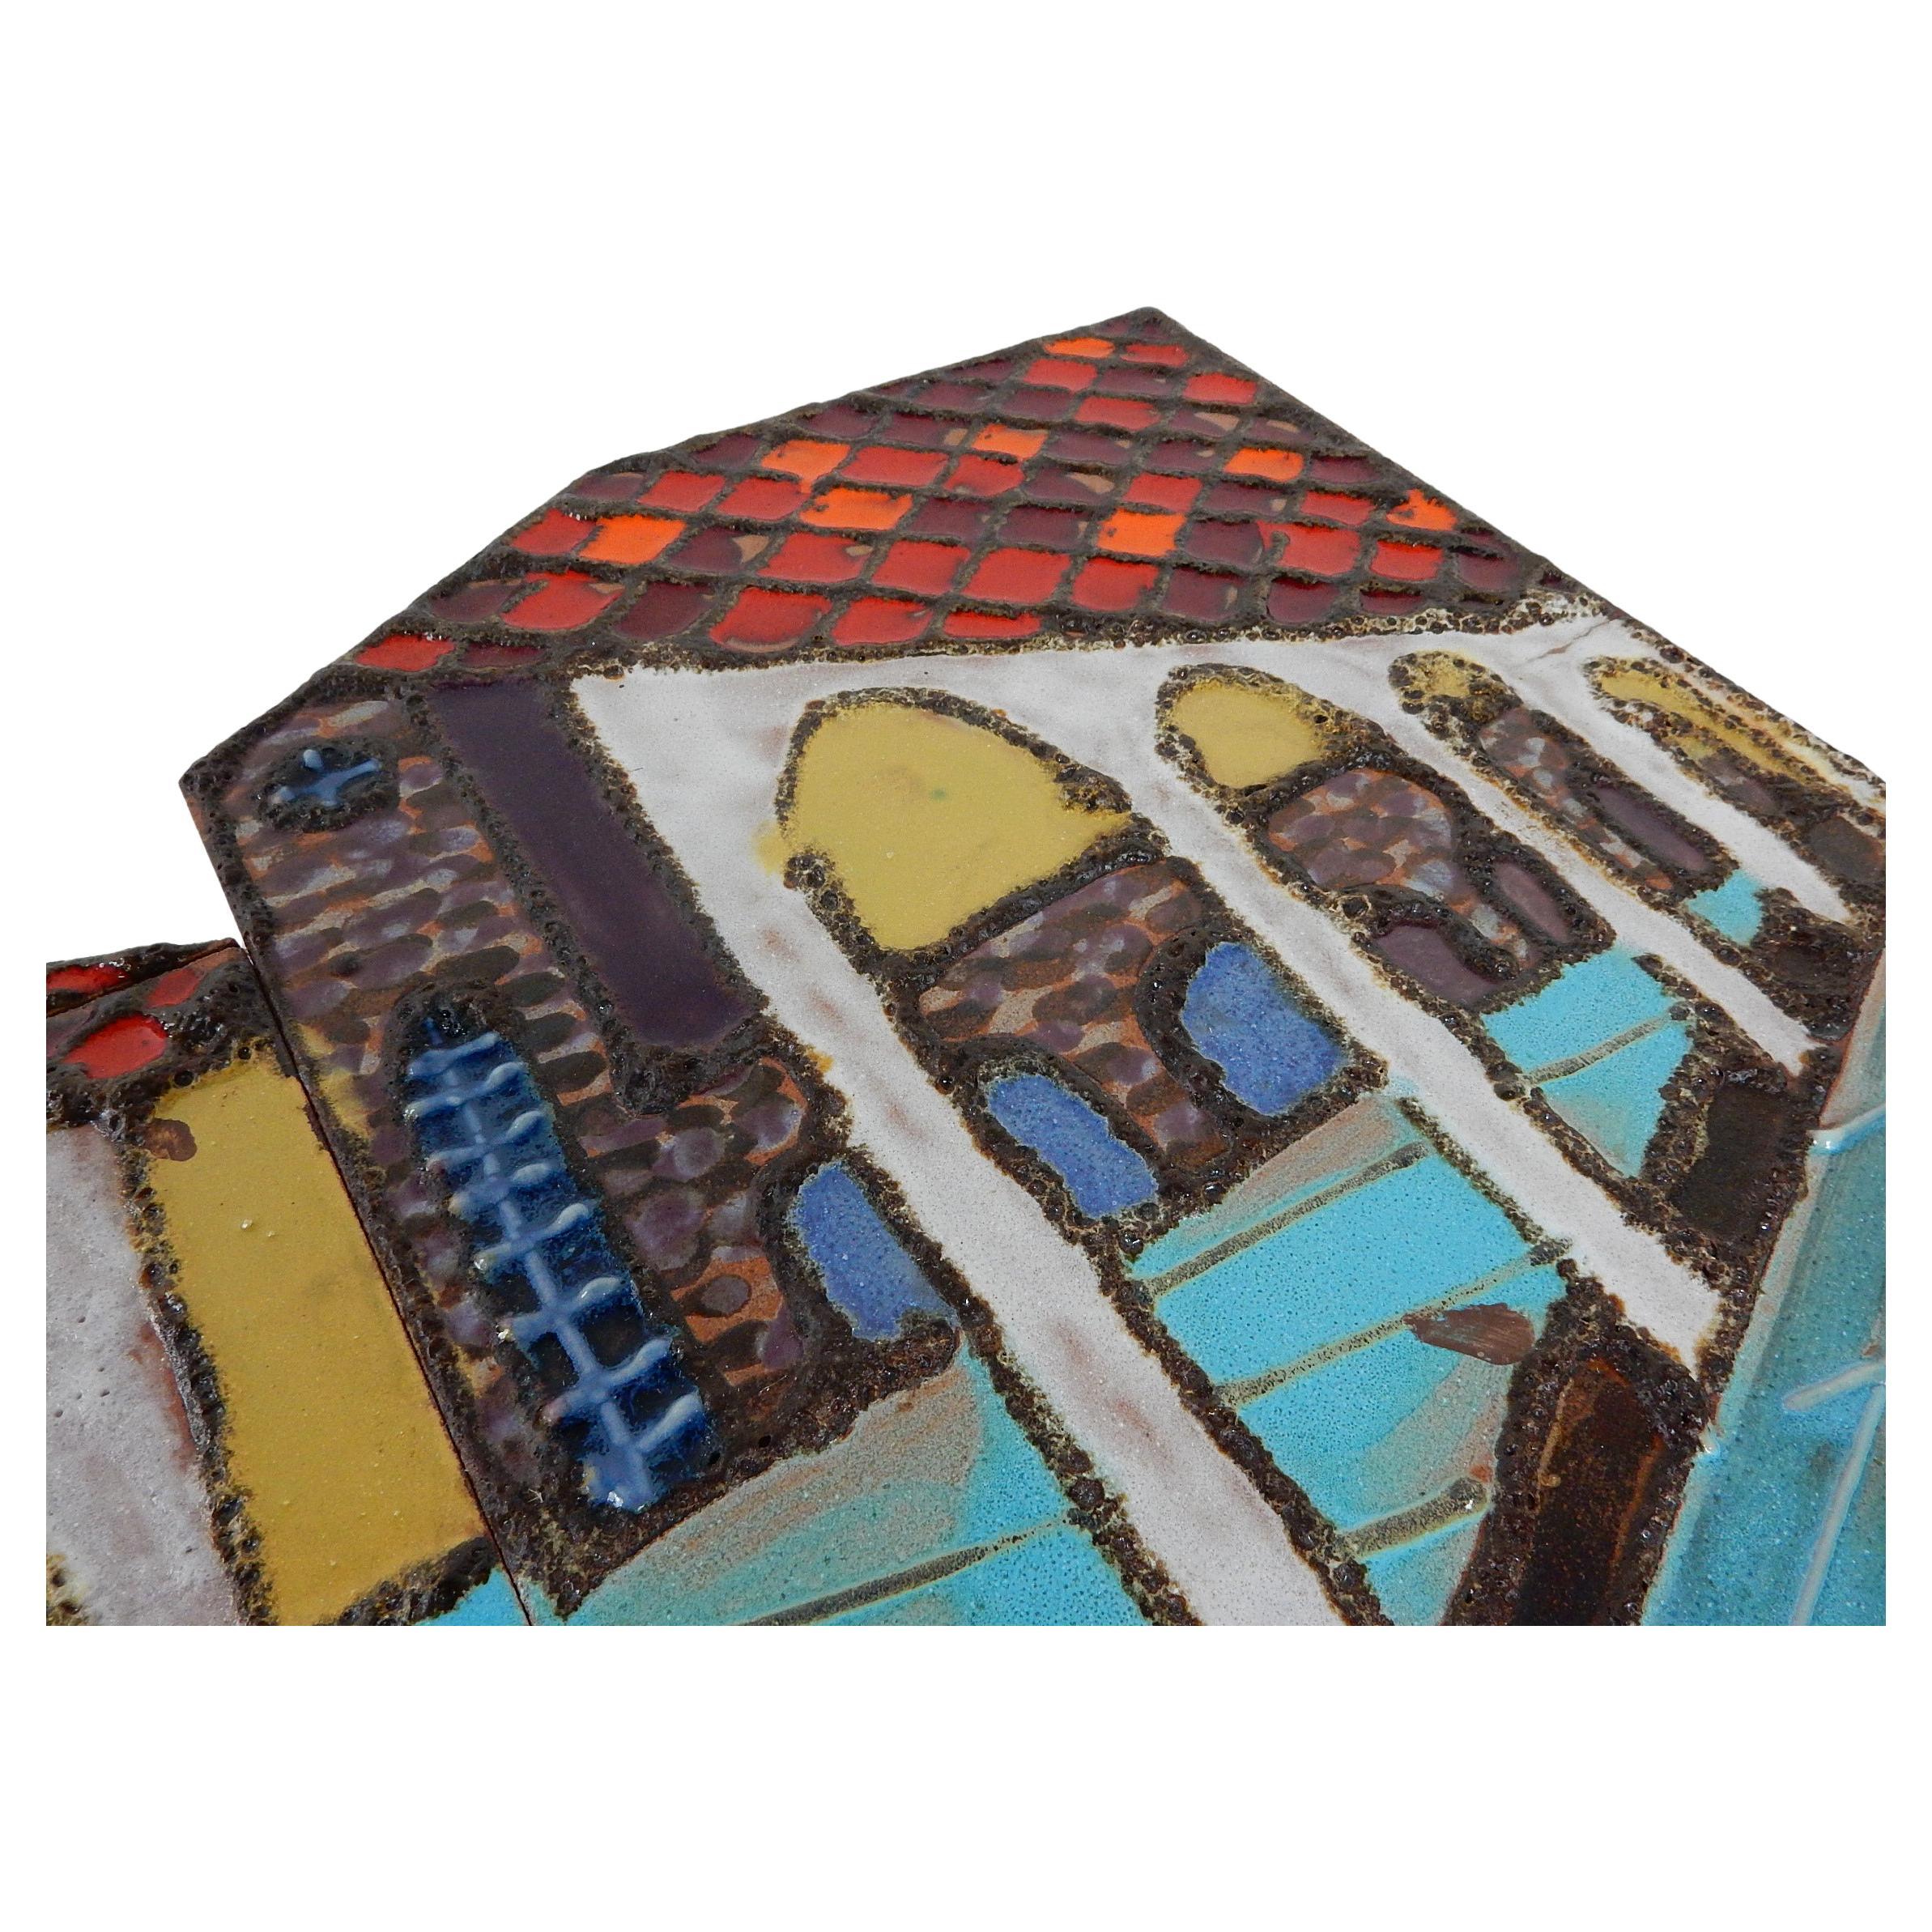 1970s California Mission Architectural Ceramic Tile Wall Art Sculpture In Good Condition For Sale In Las Vegas, NV